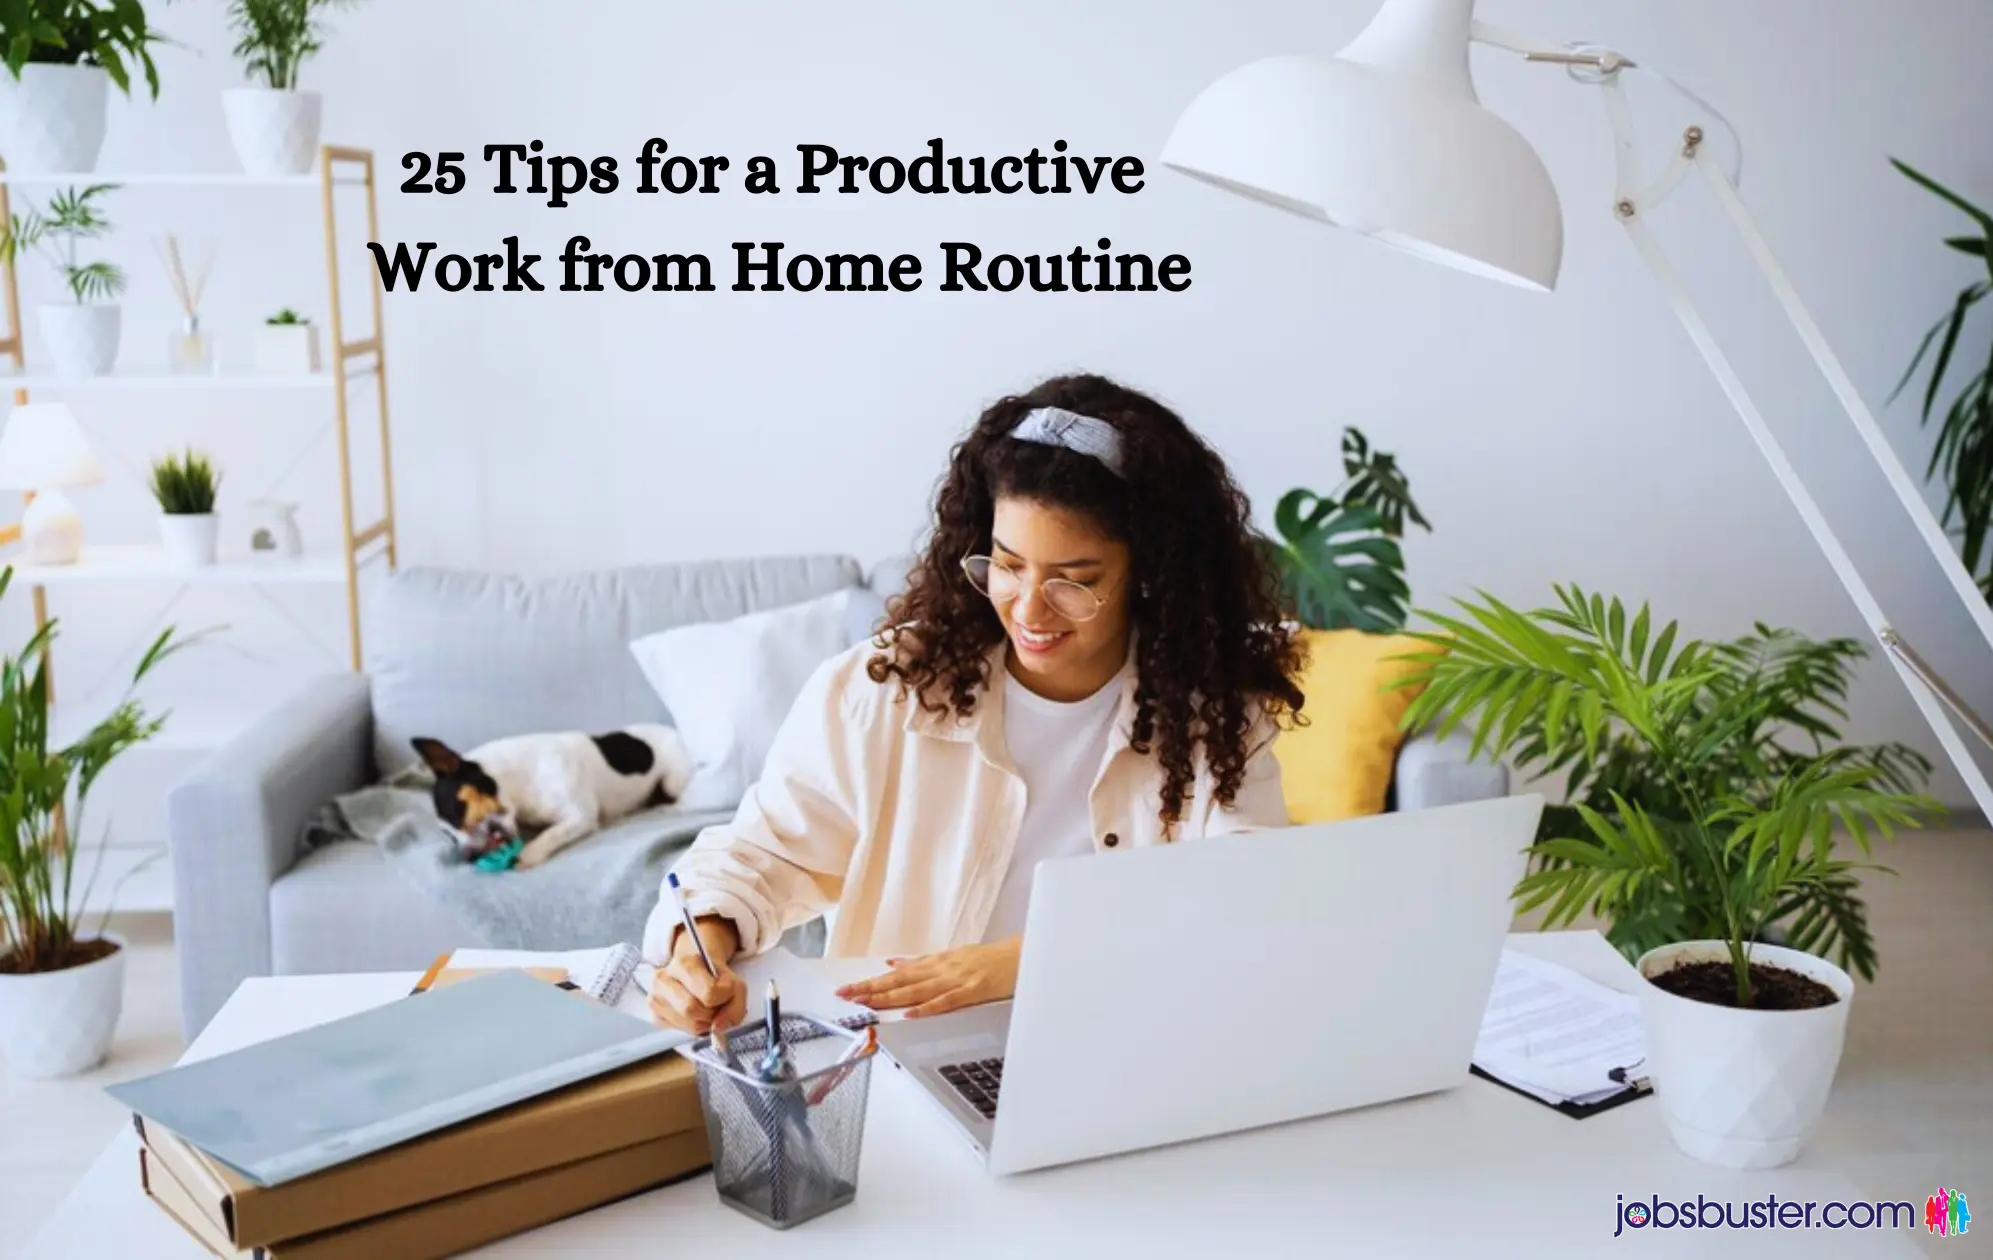 25 Tips for a Productive Work from Home Routine